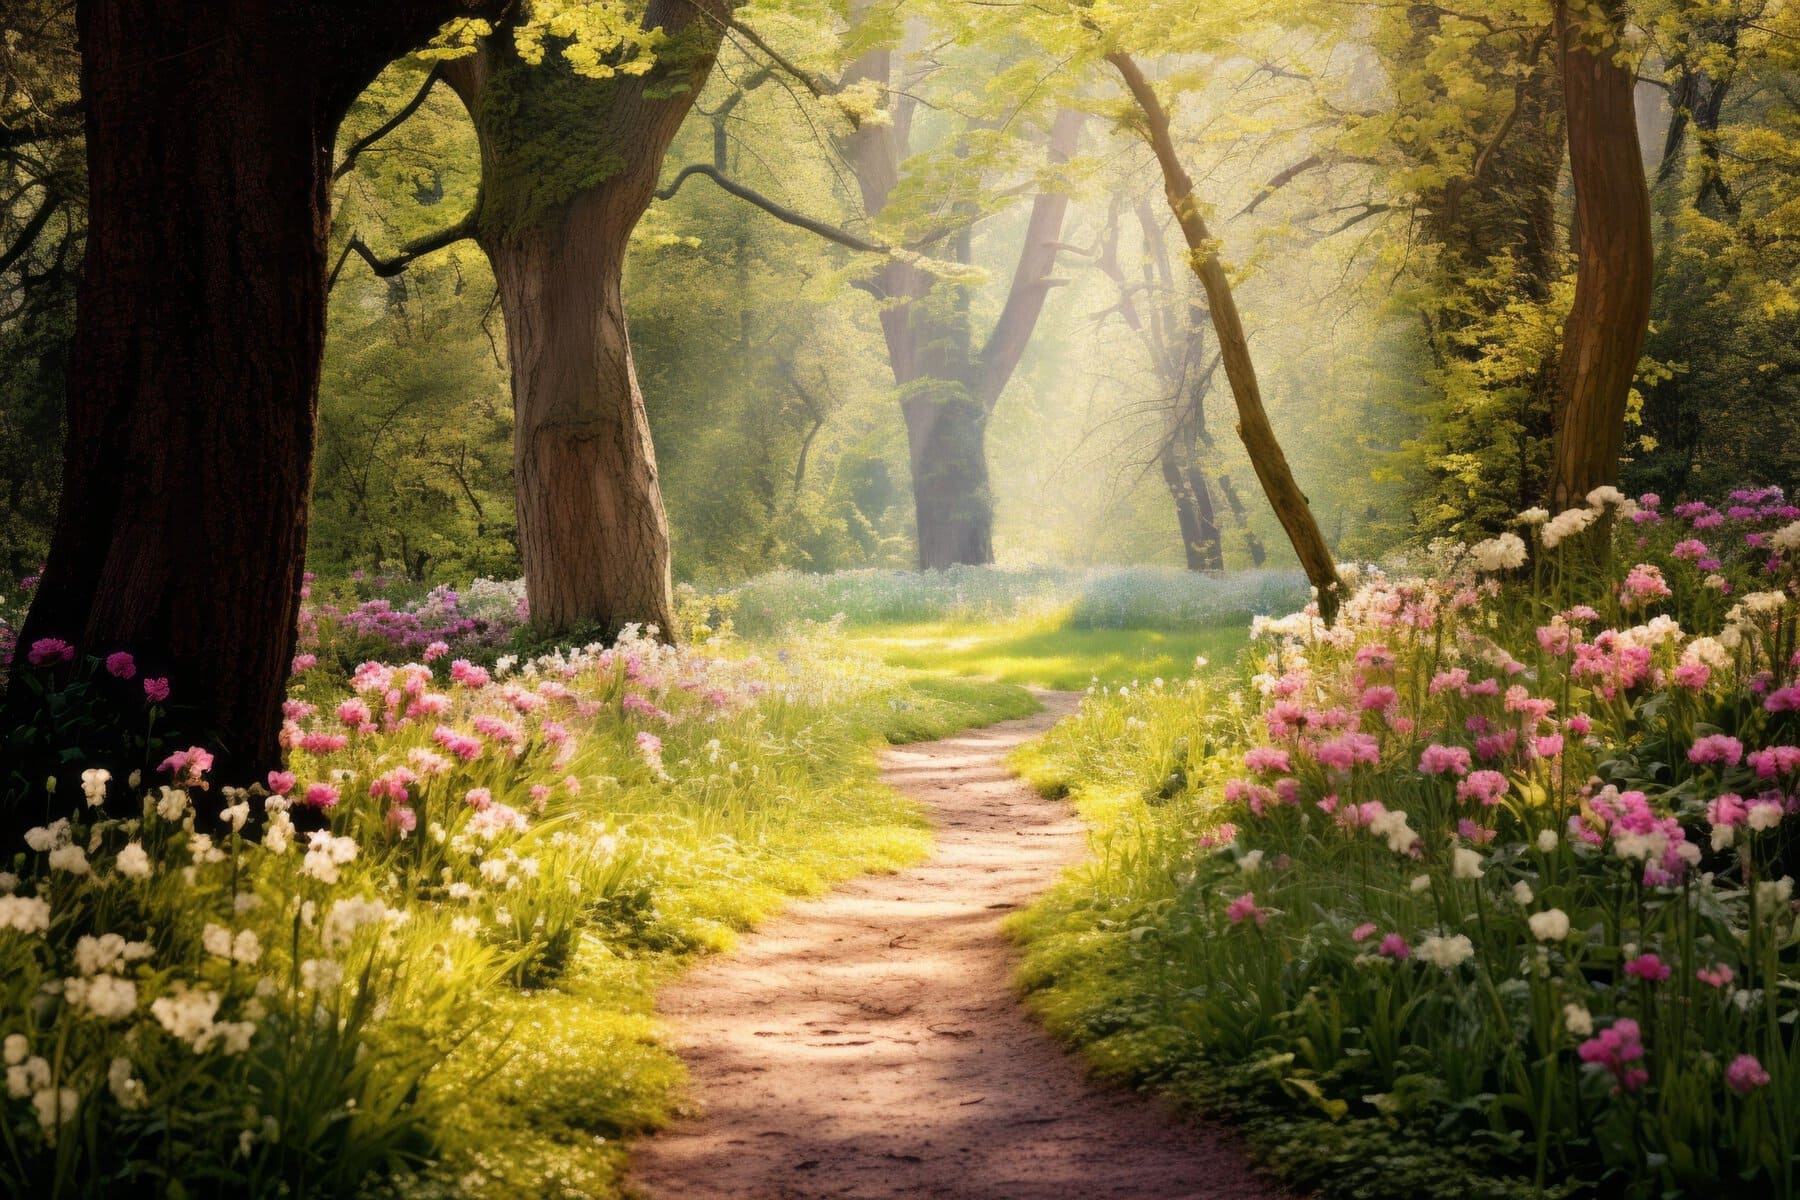 Tranquil forest path lined with wildflowers and dappled sunlight